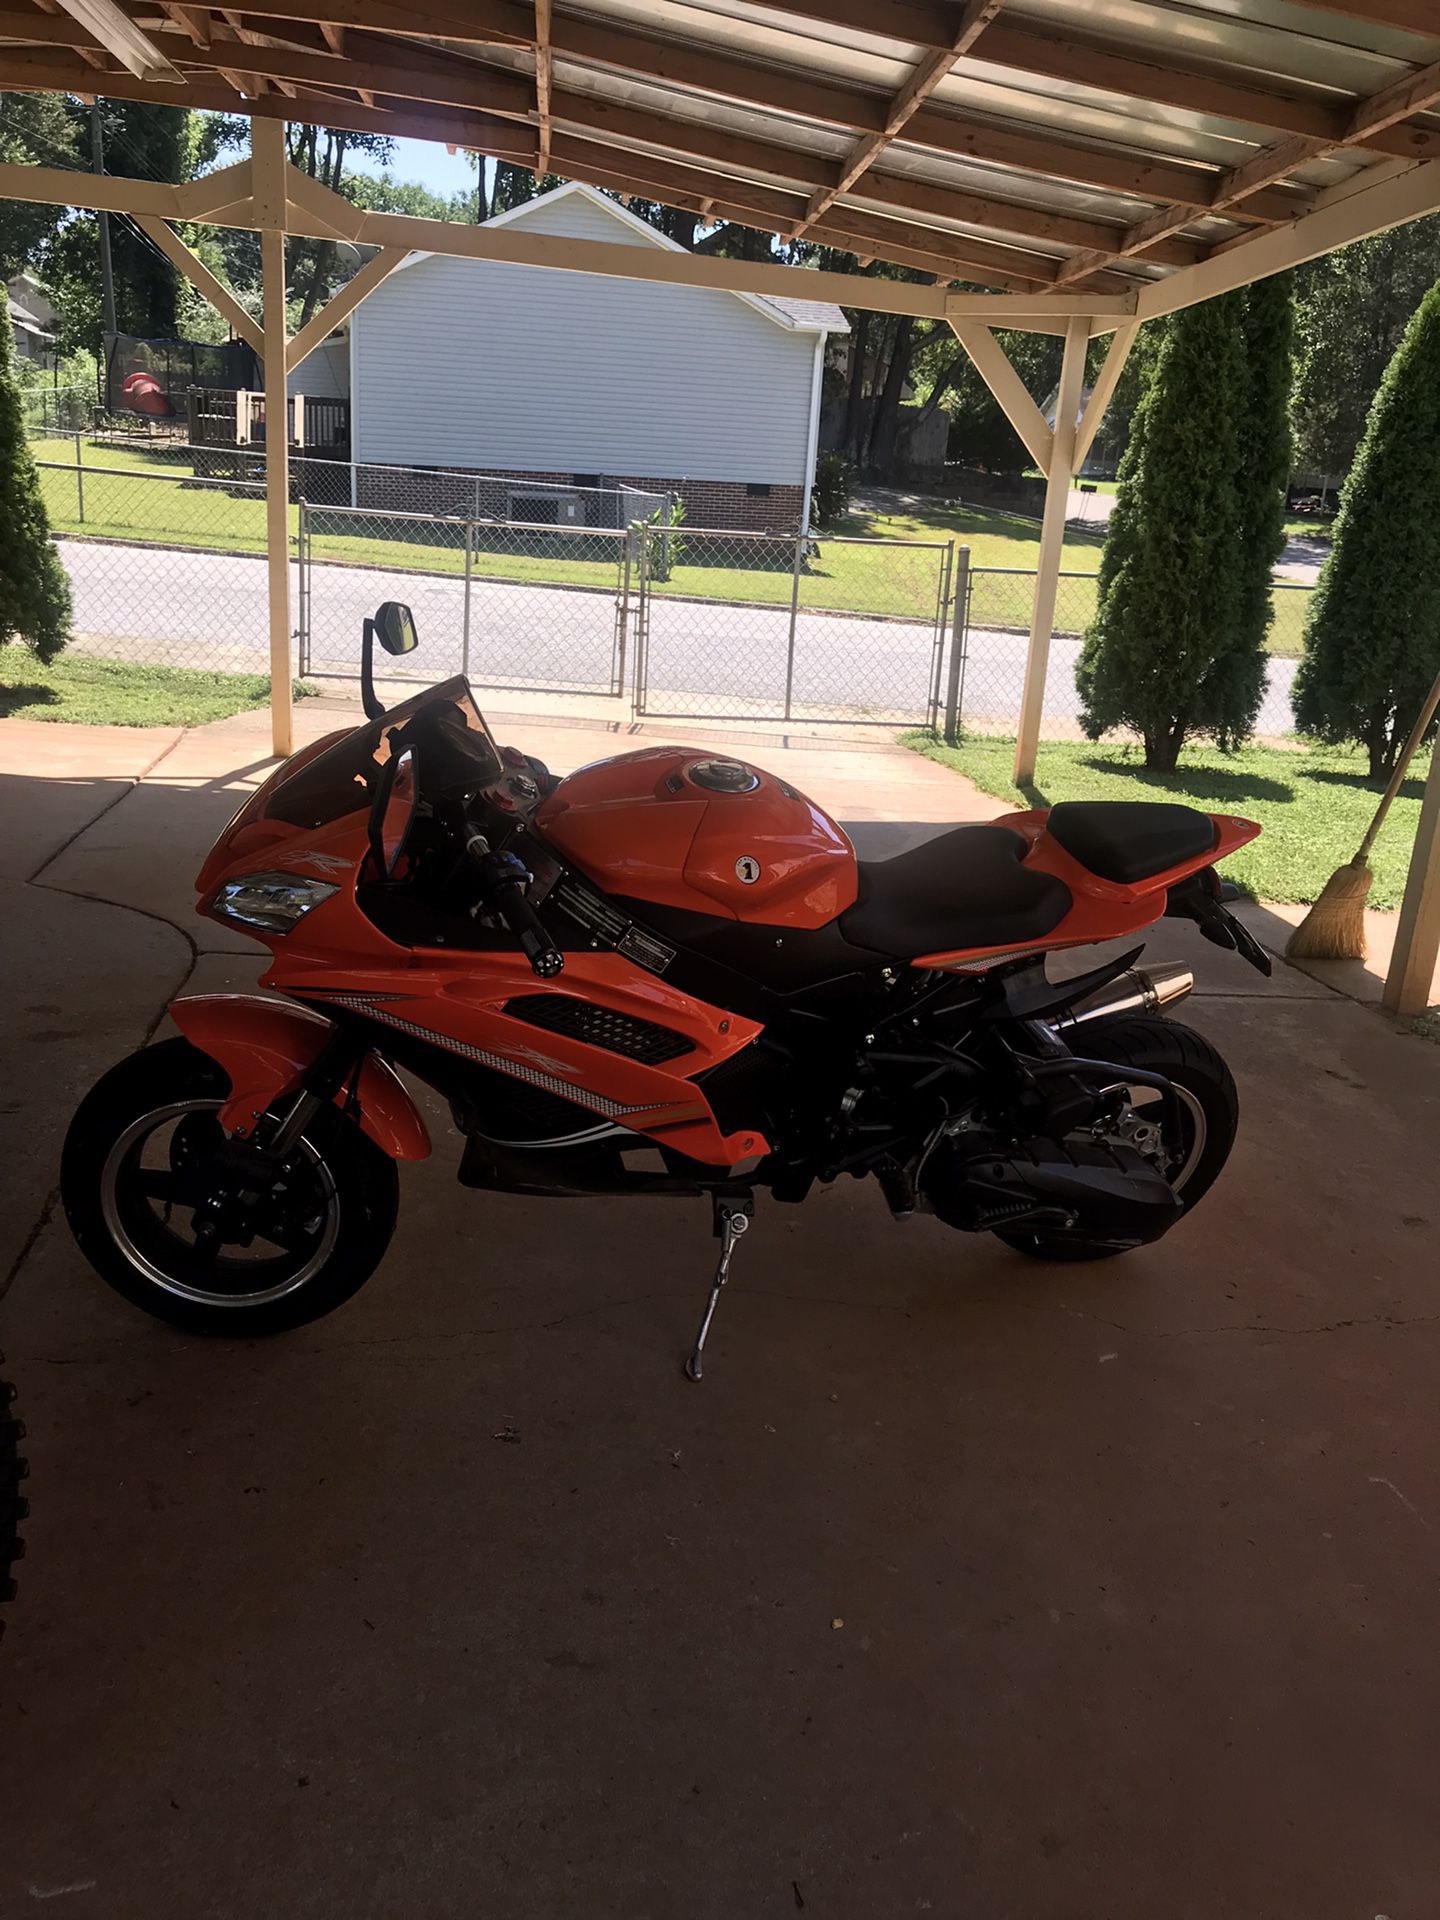 Motorcycle Z7R 200cc